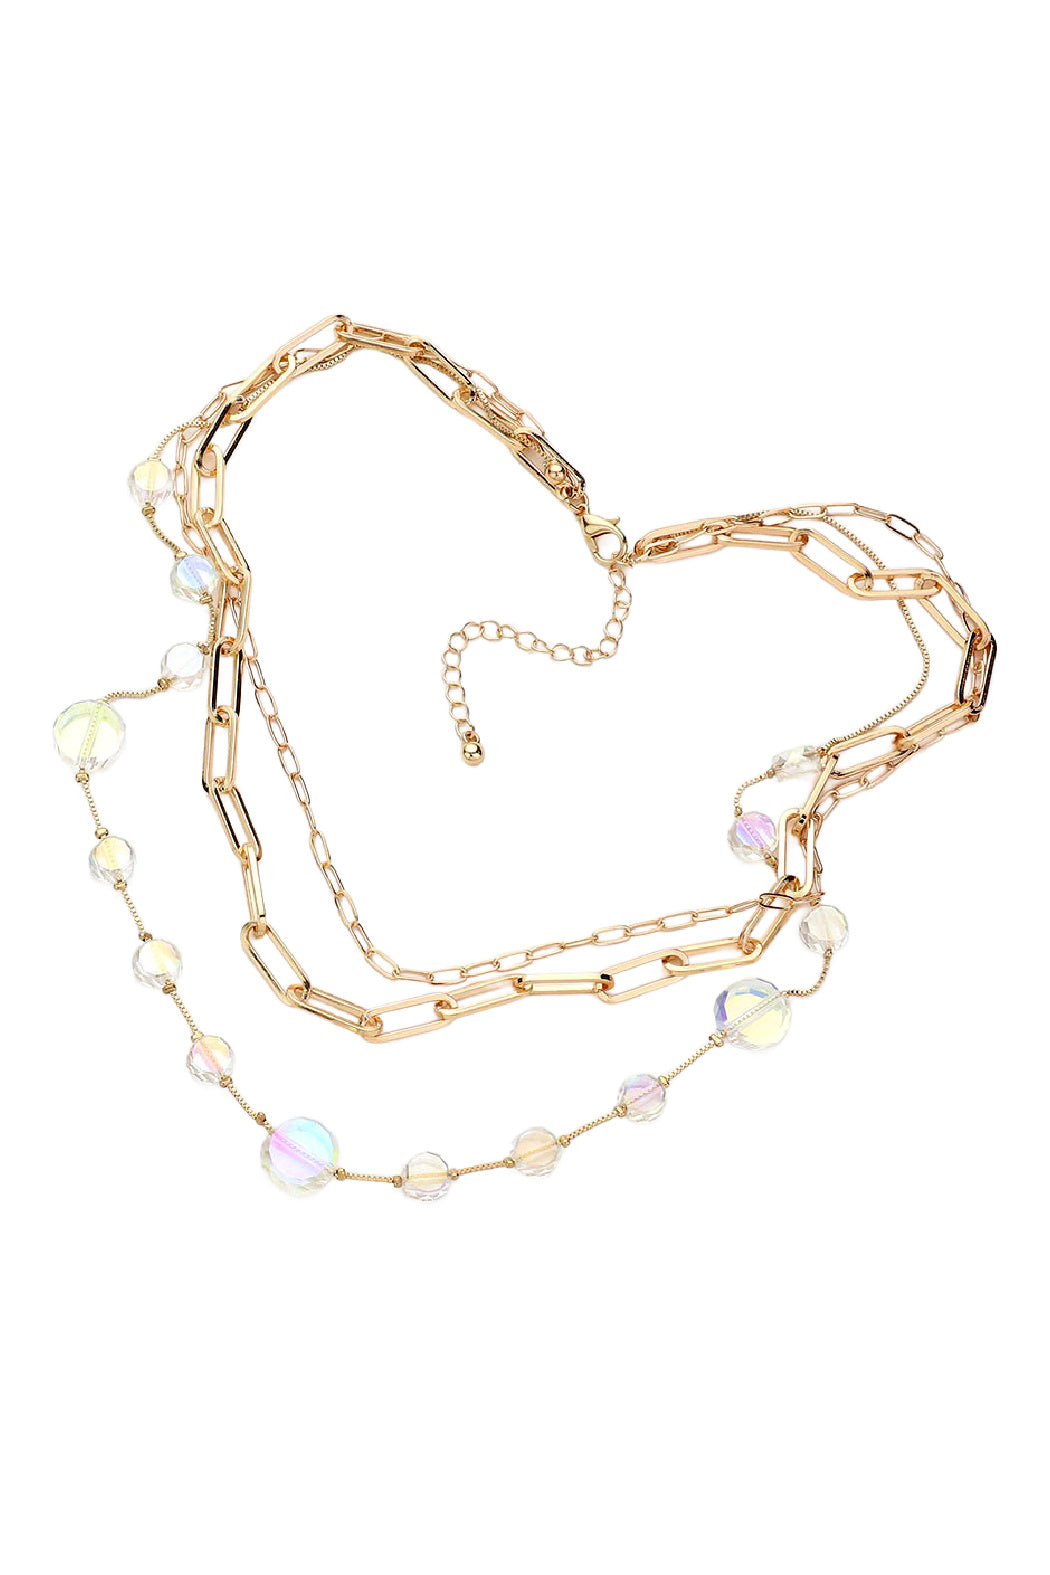 3 Strand Faceted Glass Necklace